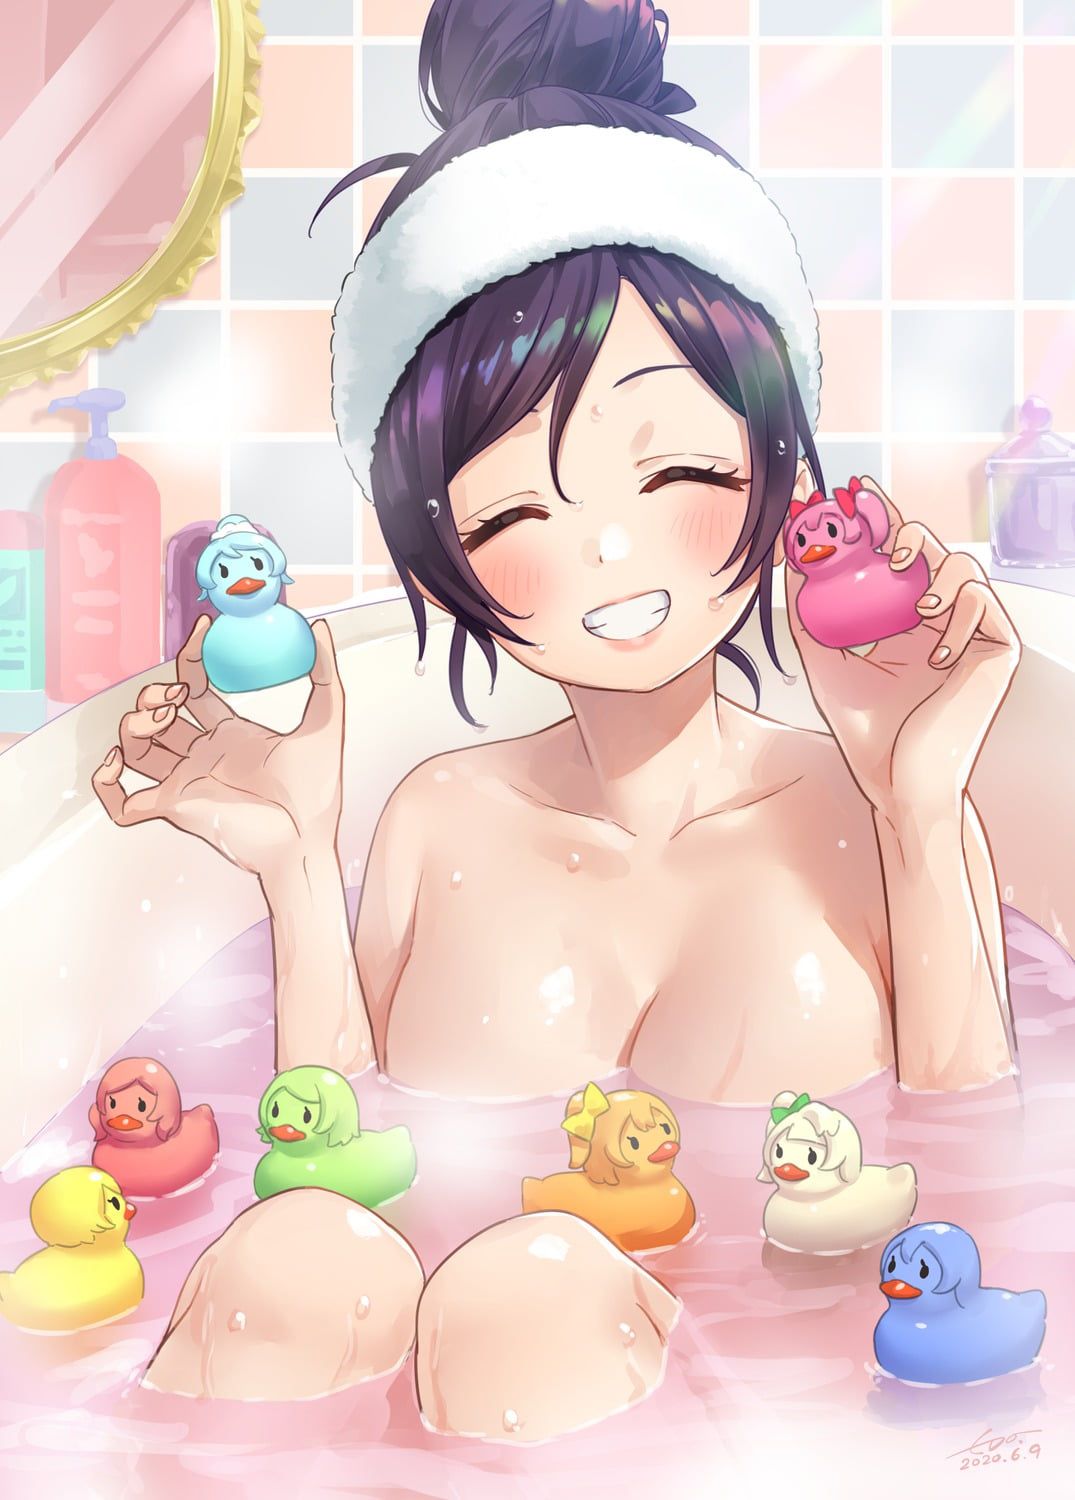 It's a bath, so it's natural to relax naked! It's not ecchi! 17